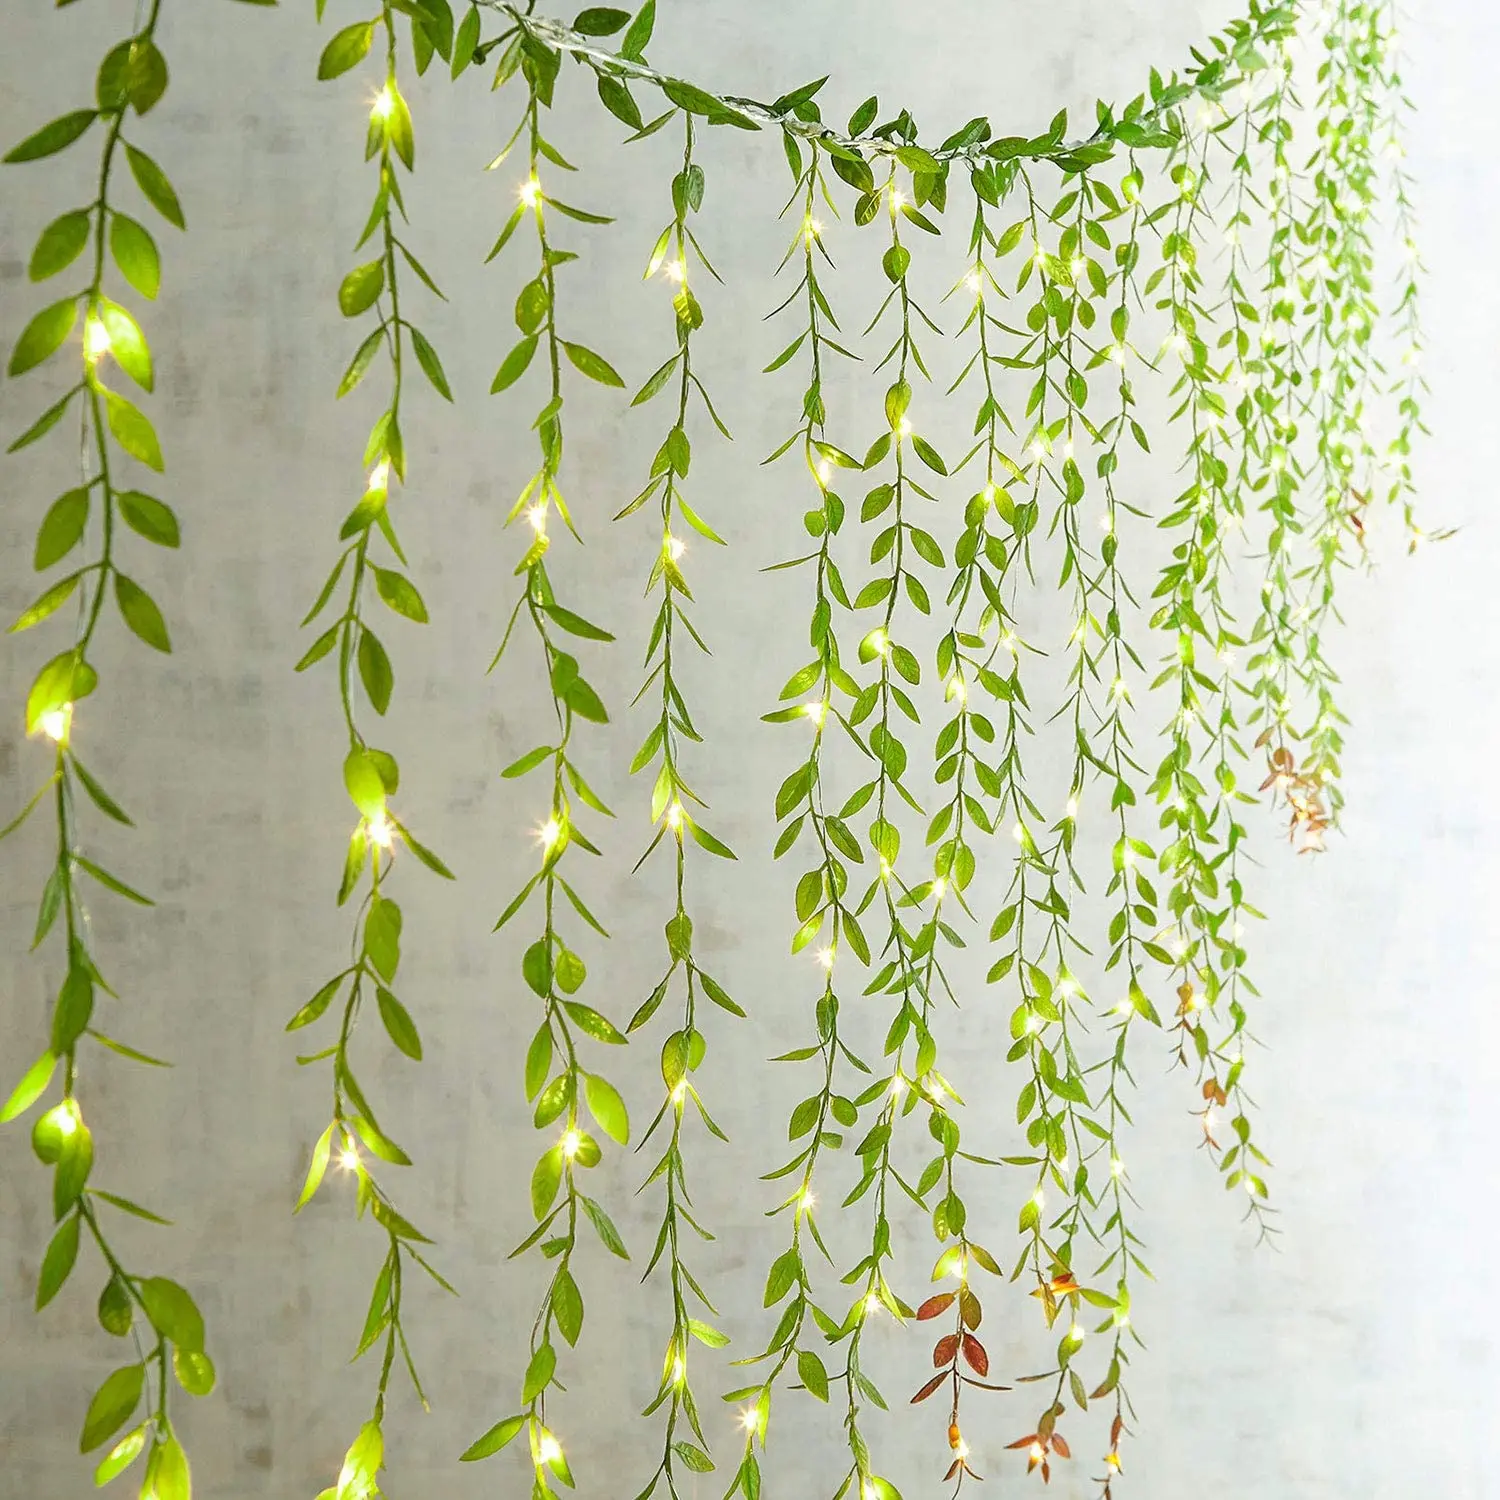 Artificial Ivy Willow Garland Fake Vines Lights String Green Hanging Plant for Wall Party Wedding Home Indoor Outdoor Decoration